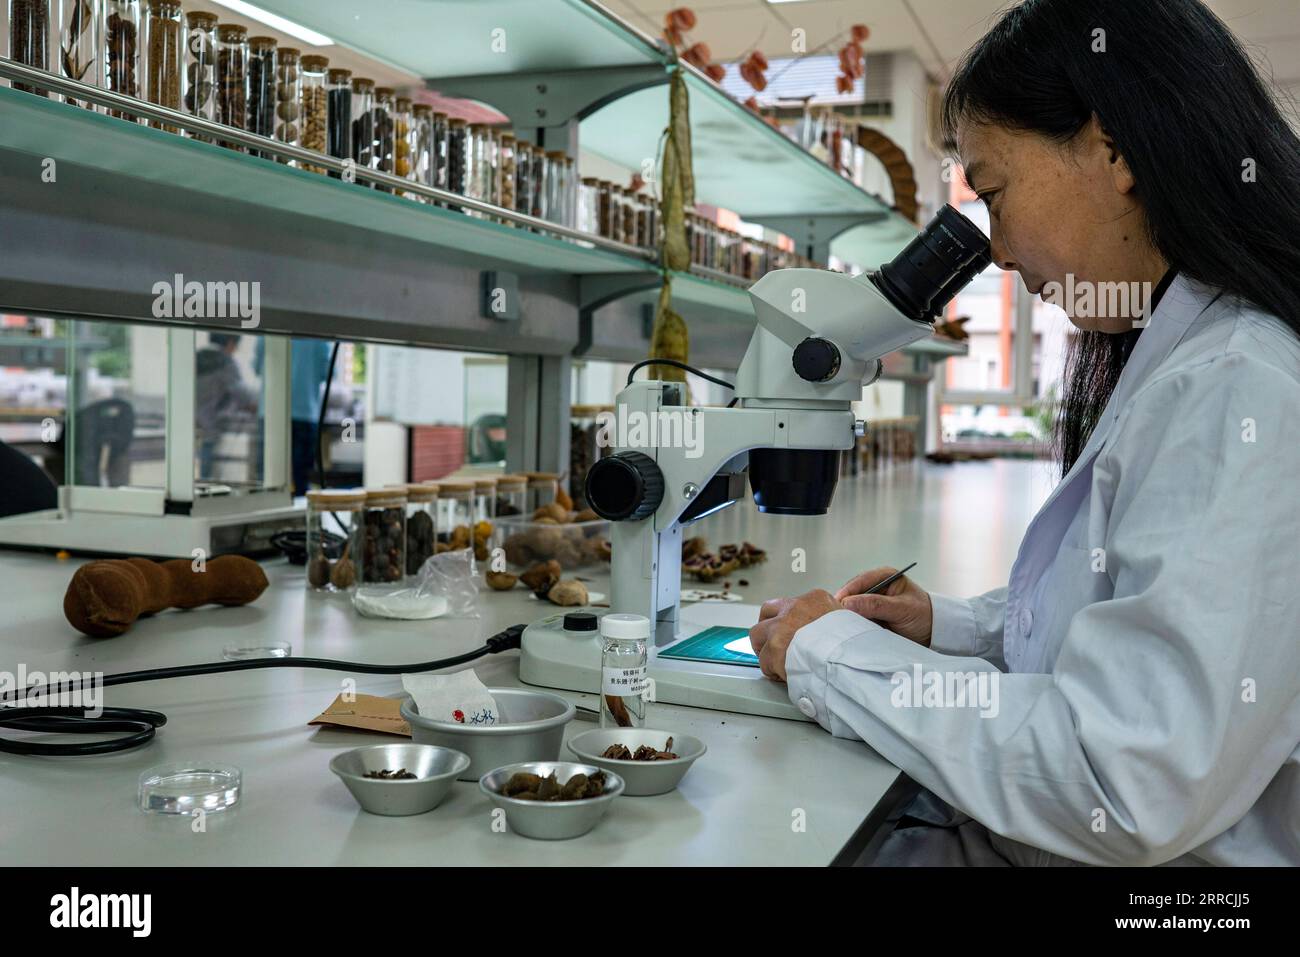 211108 -- KUNMING, Nov. 8, 2021 -- A researcher studies seed morphology through a microscope at the Germplasm Bank of Wild Species in Kunming, southwest China s Yunnan Province, Oct. 20, 2021. The Germplasm Bank of Wild Species, located in the northern suburb of Kunming, capital of China s Yunnan Province, is a Noah s Ark for tens of thousands of species, including rare Davidia involucrata, Taxus himalayana and Rhinopithecus bieti. The Germplasm Bank of Wild Species has preserved 85,046 accessions from 10,601 species of wild plants, accounting for 36 percent of the number of China s seed plant Stock Photo